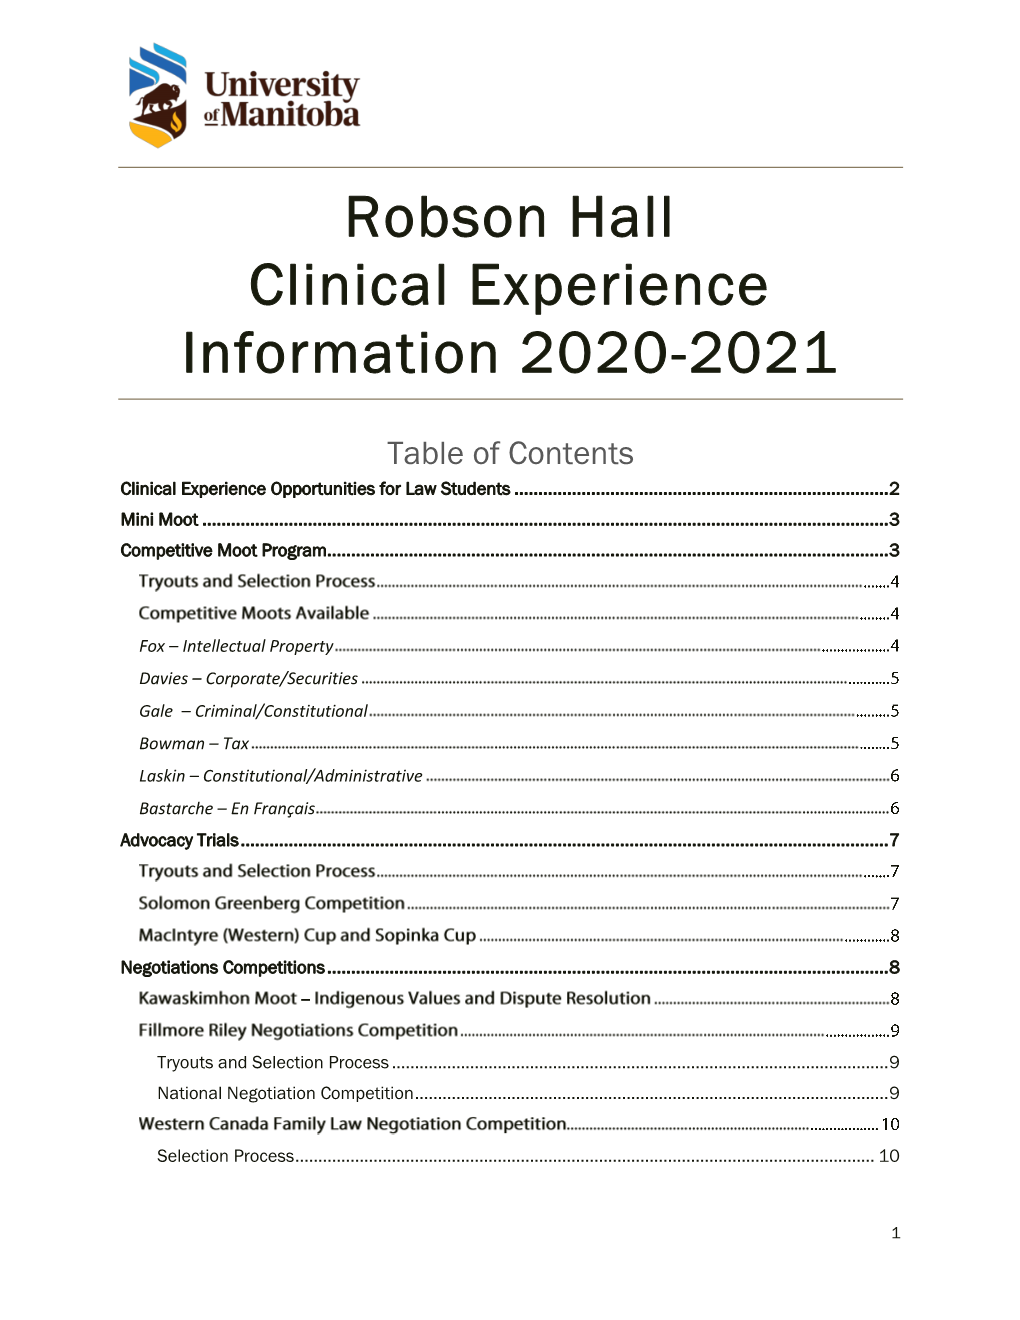 Robson Hall Clinical Experience Information 2020-2021